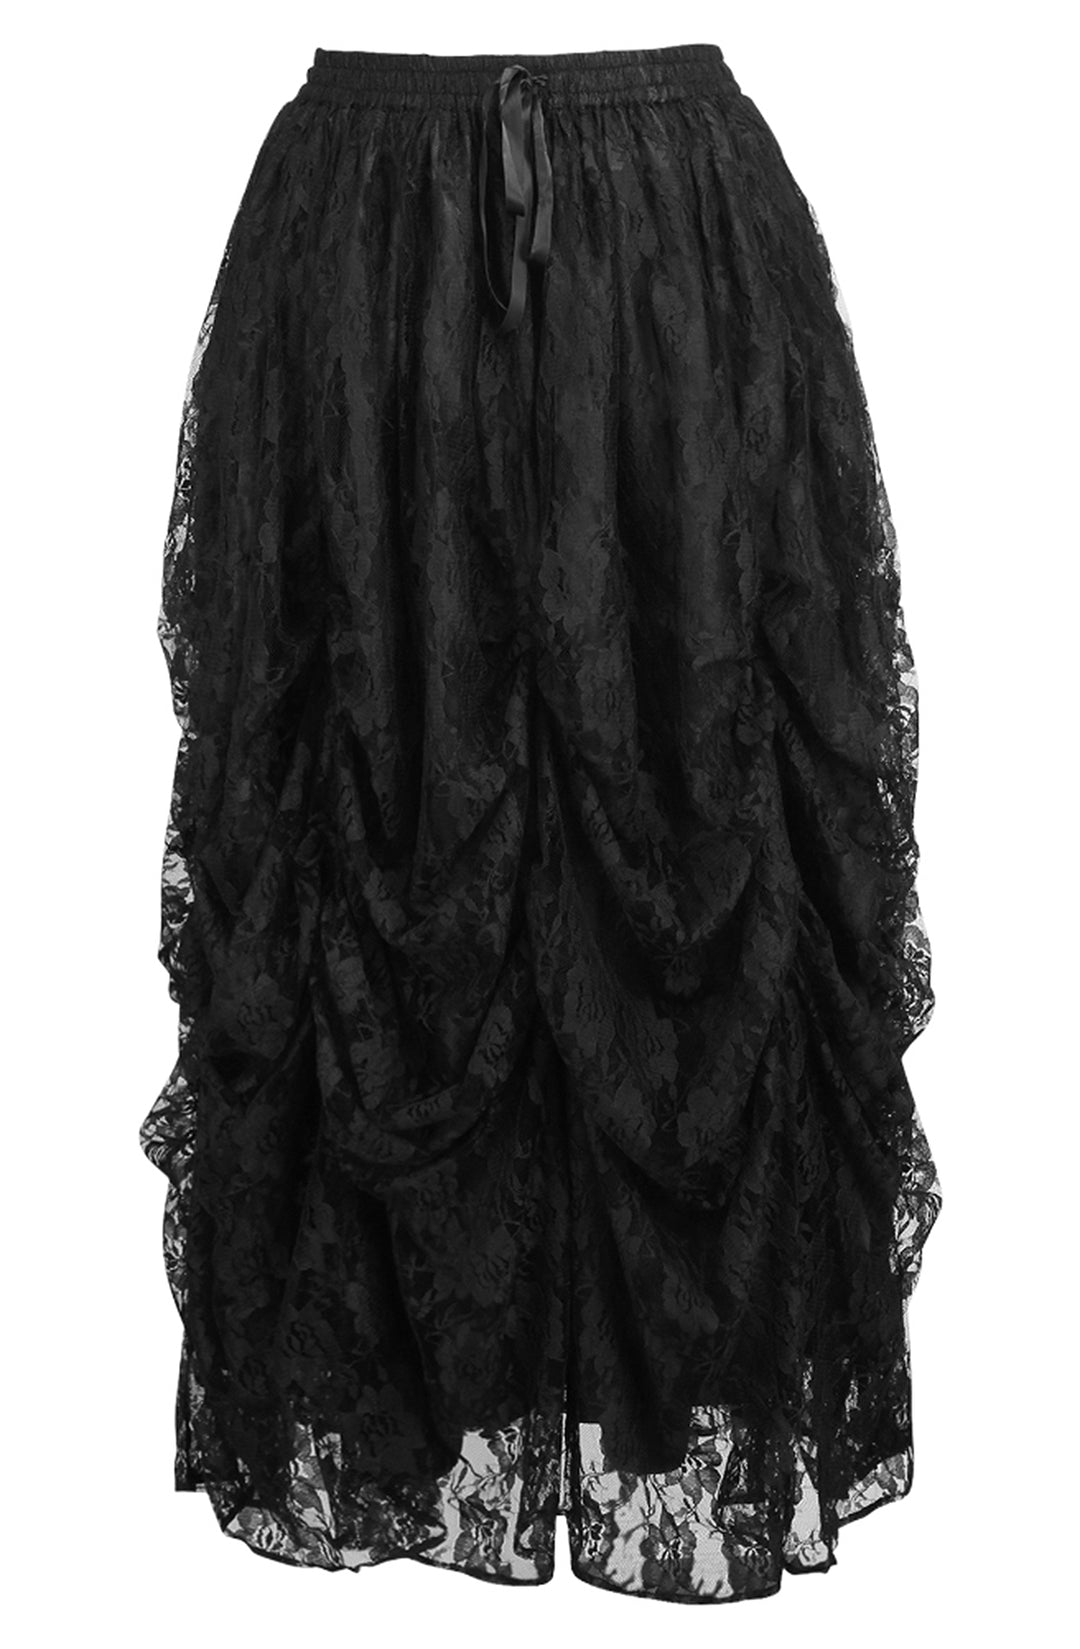 Black Lace Ball Gown Skirt 1